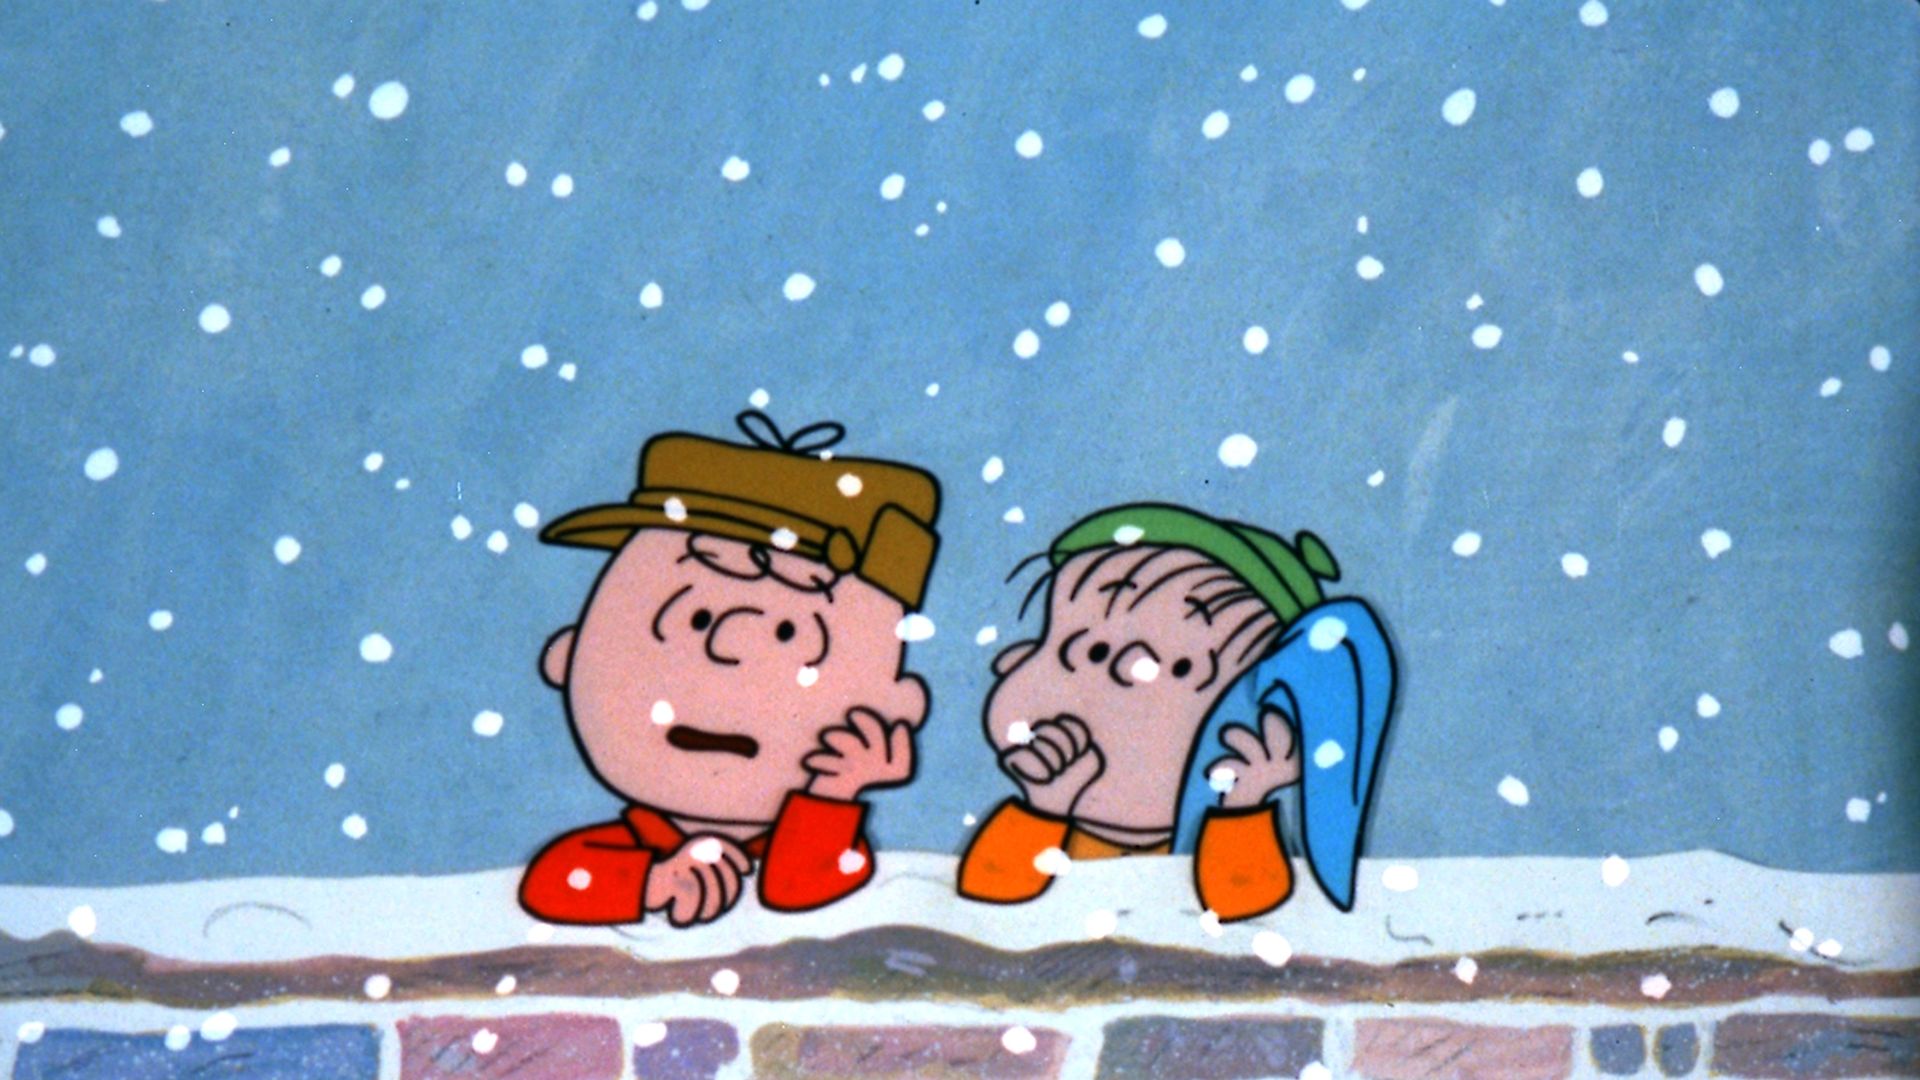 A scene from "A Charlie Brown Christmas" 